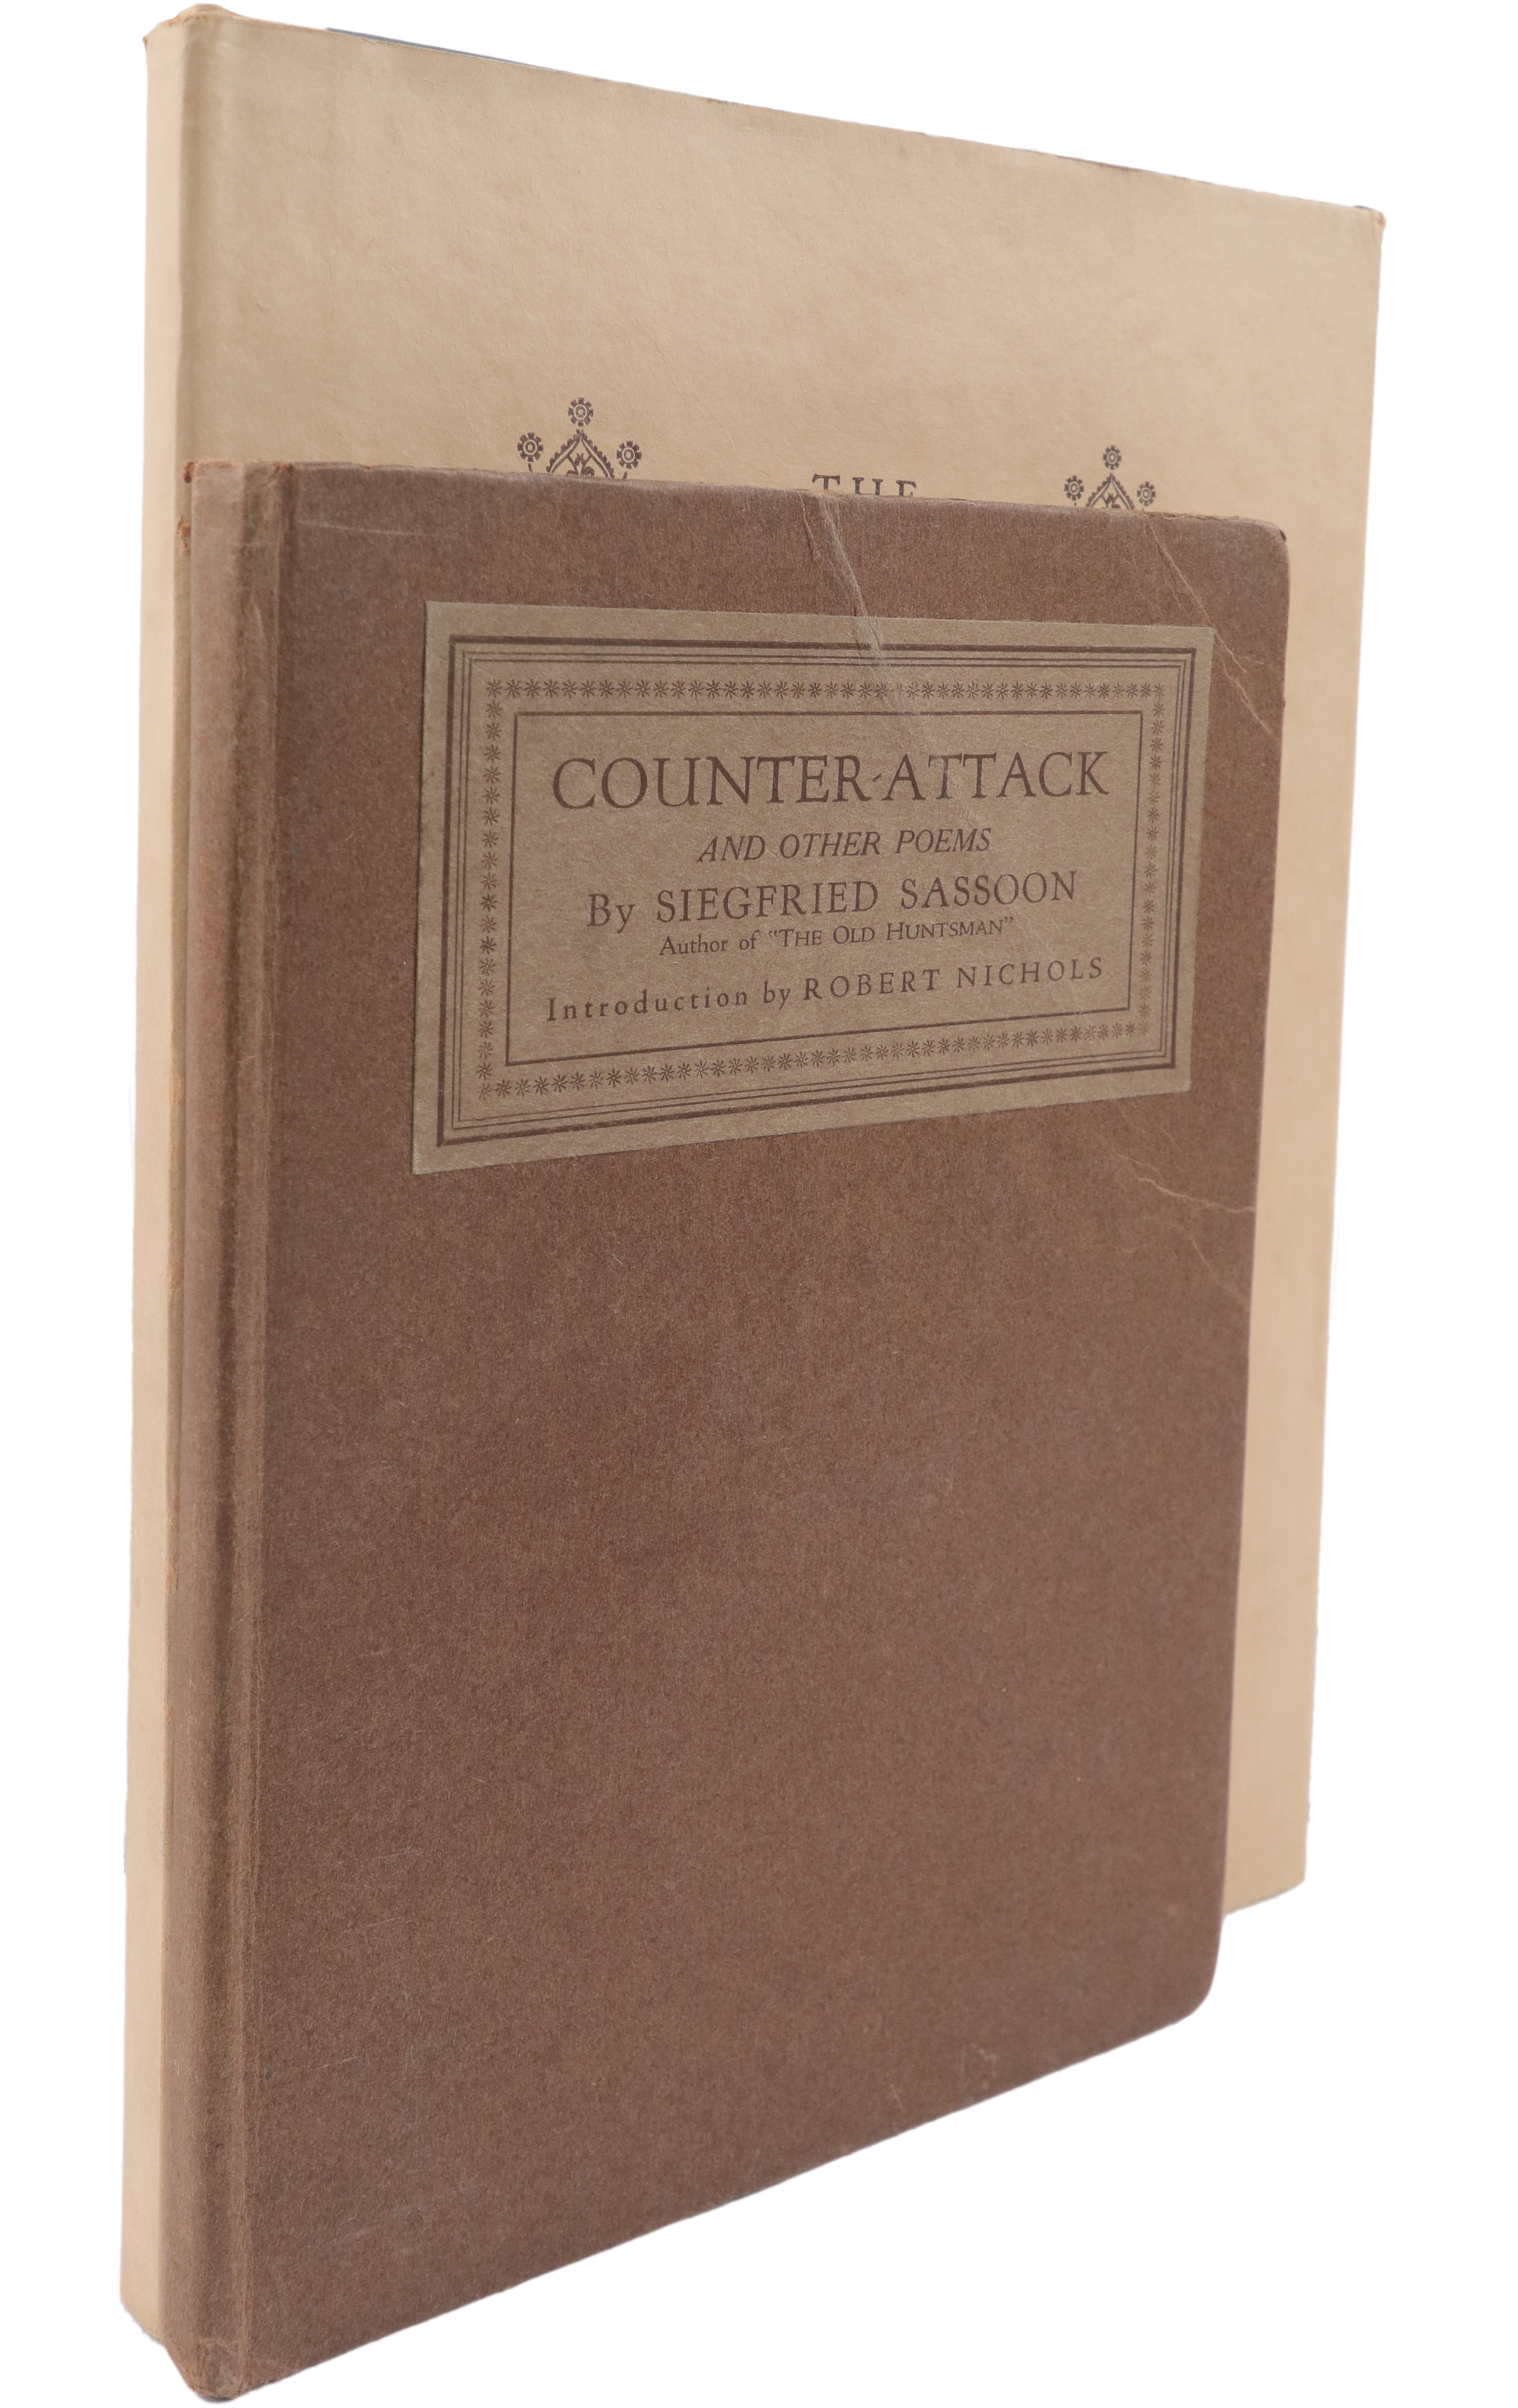 Siegfried Sassoon (1886-1967) Counter-Attack and Other Poems Published by E. P. Dutton & Co., New